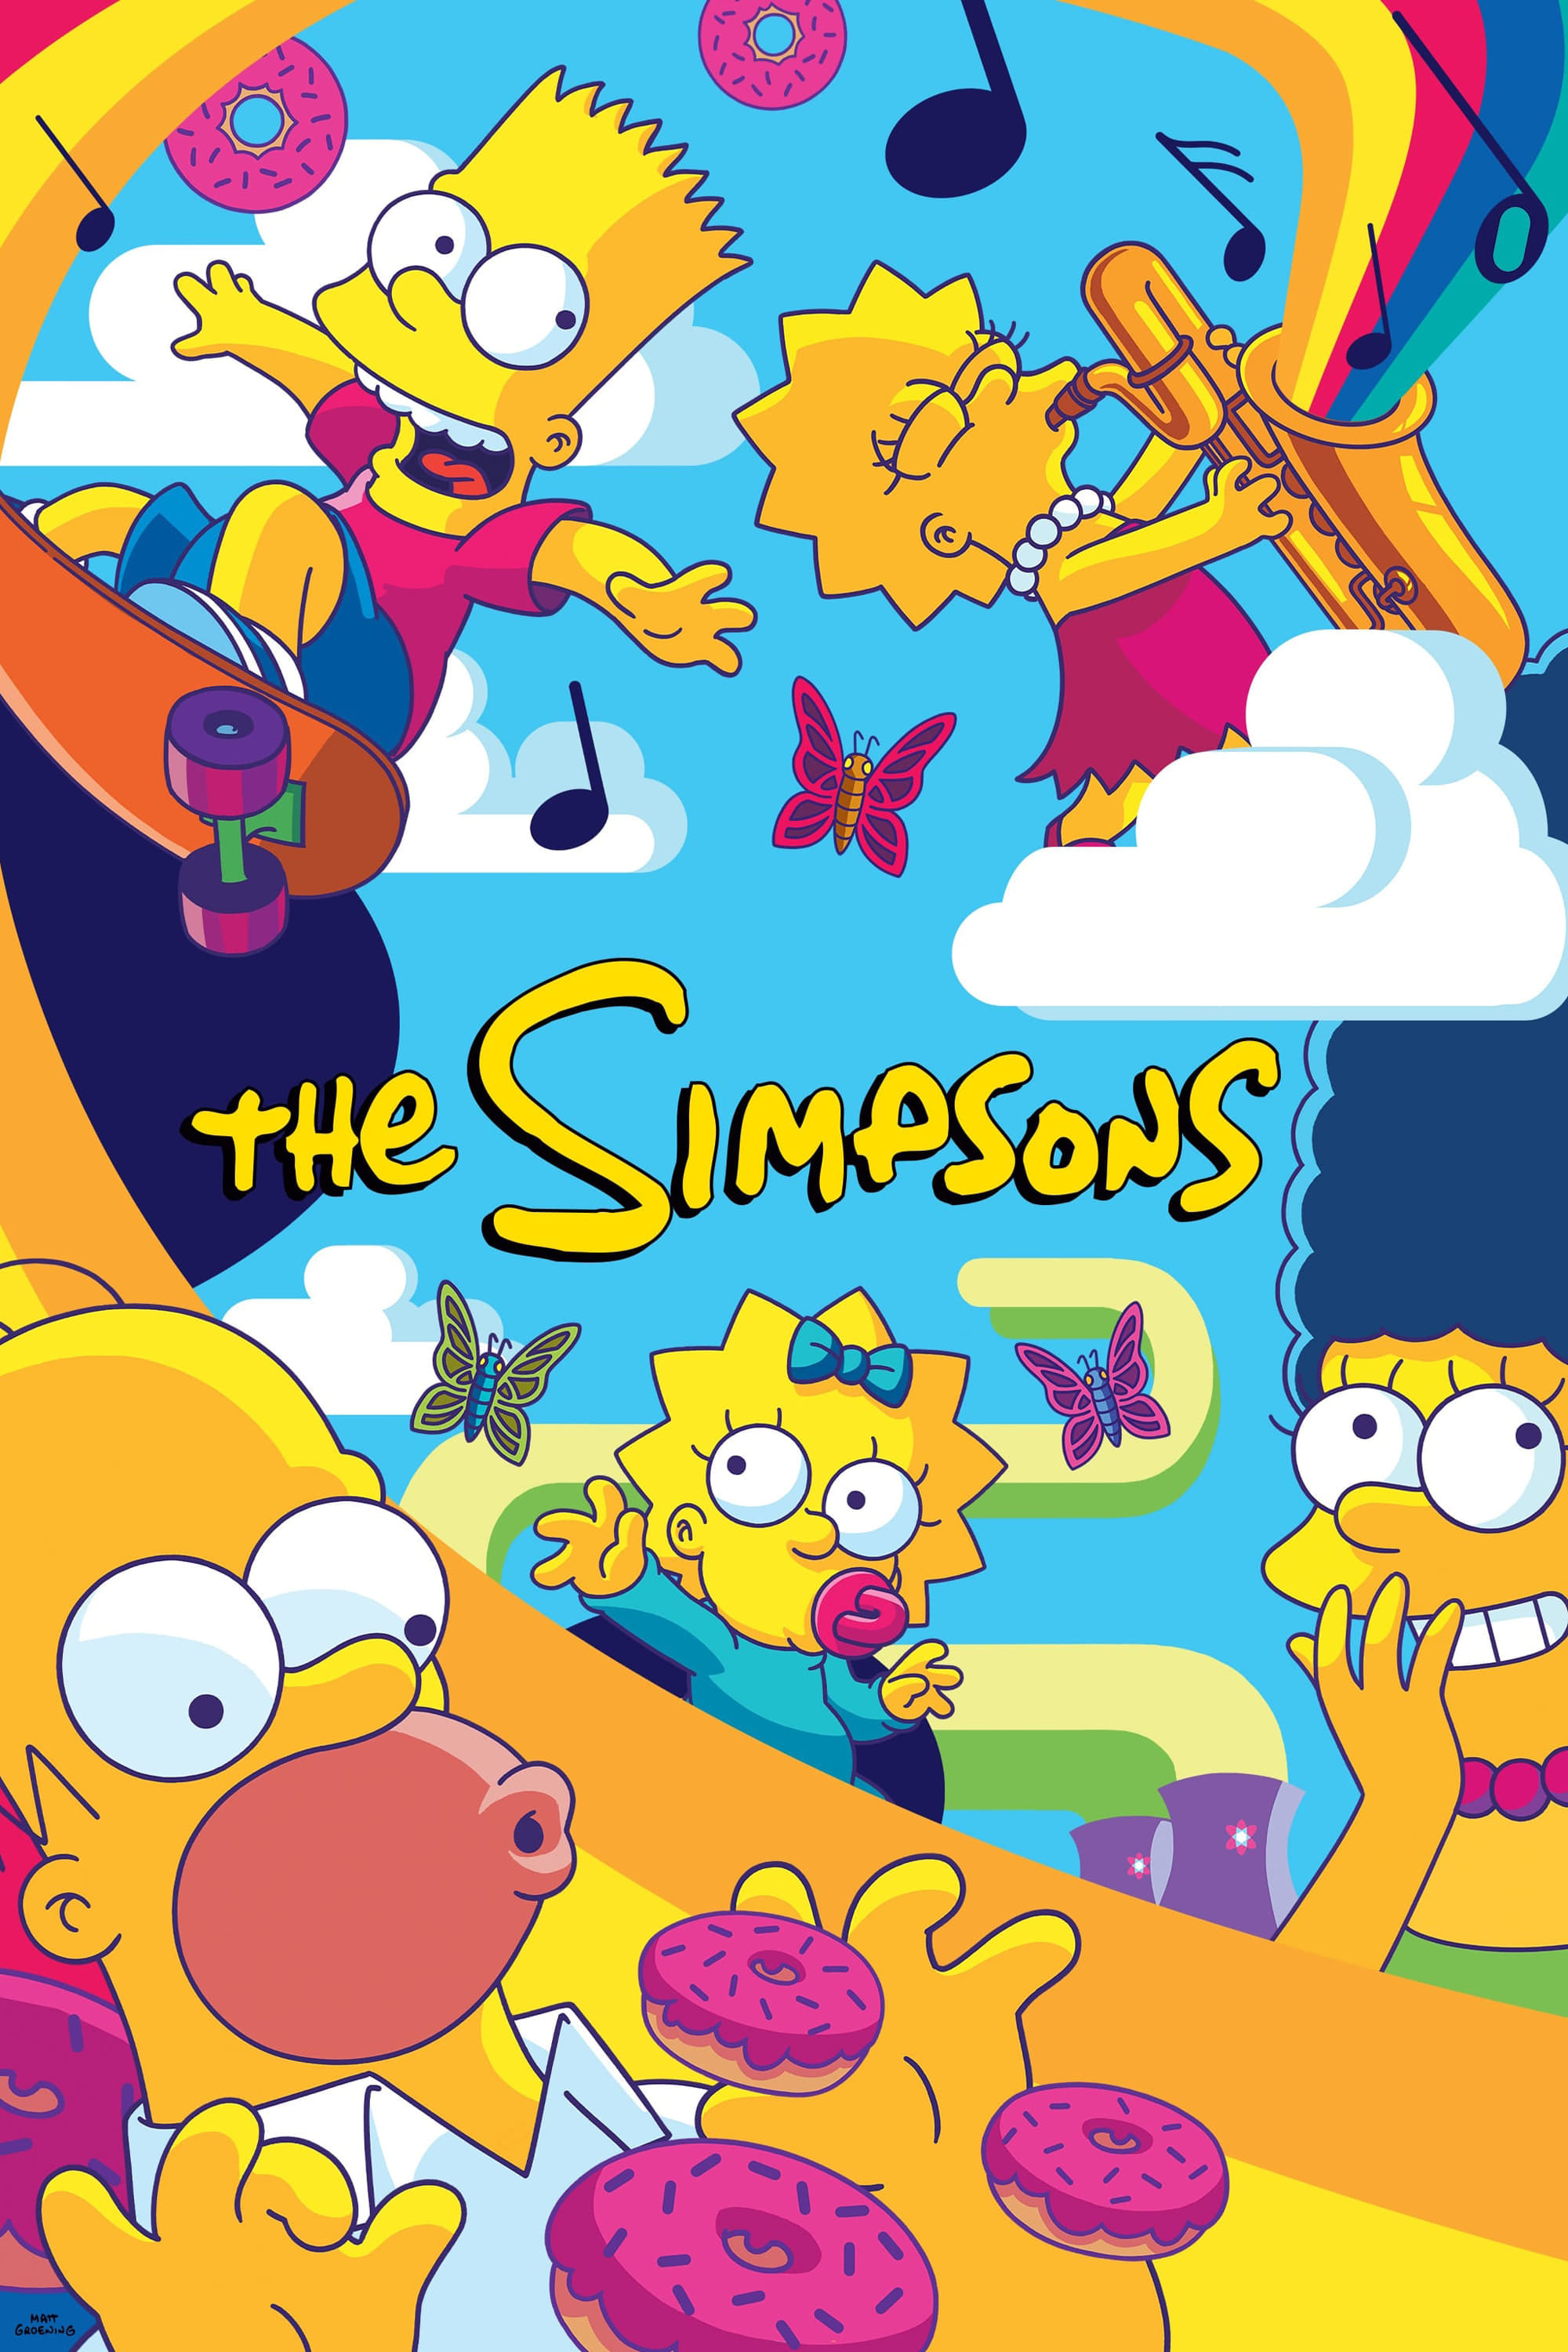 The Simpsons (S02E14)